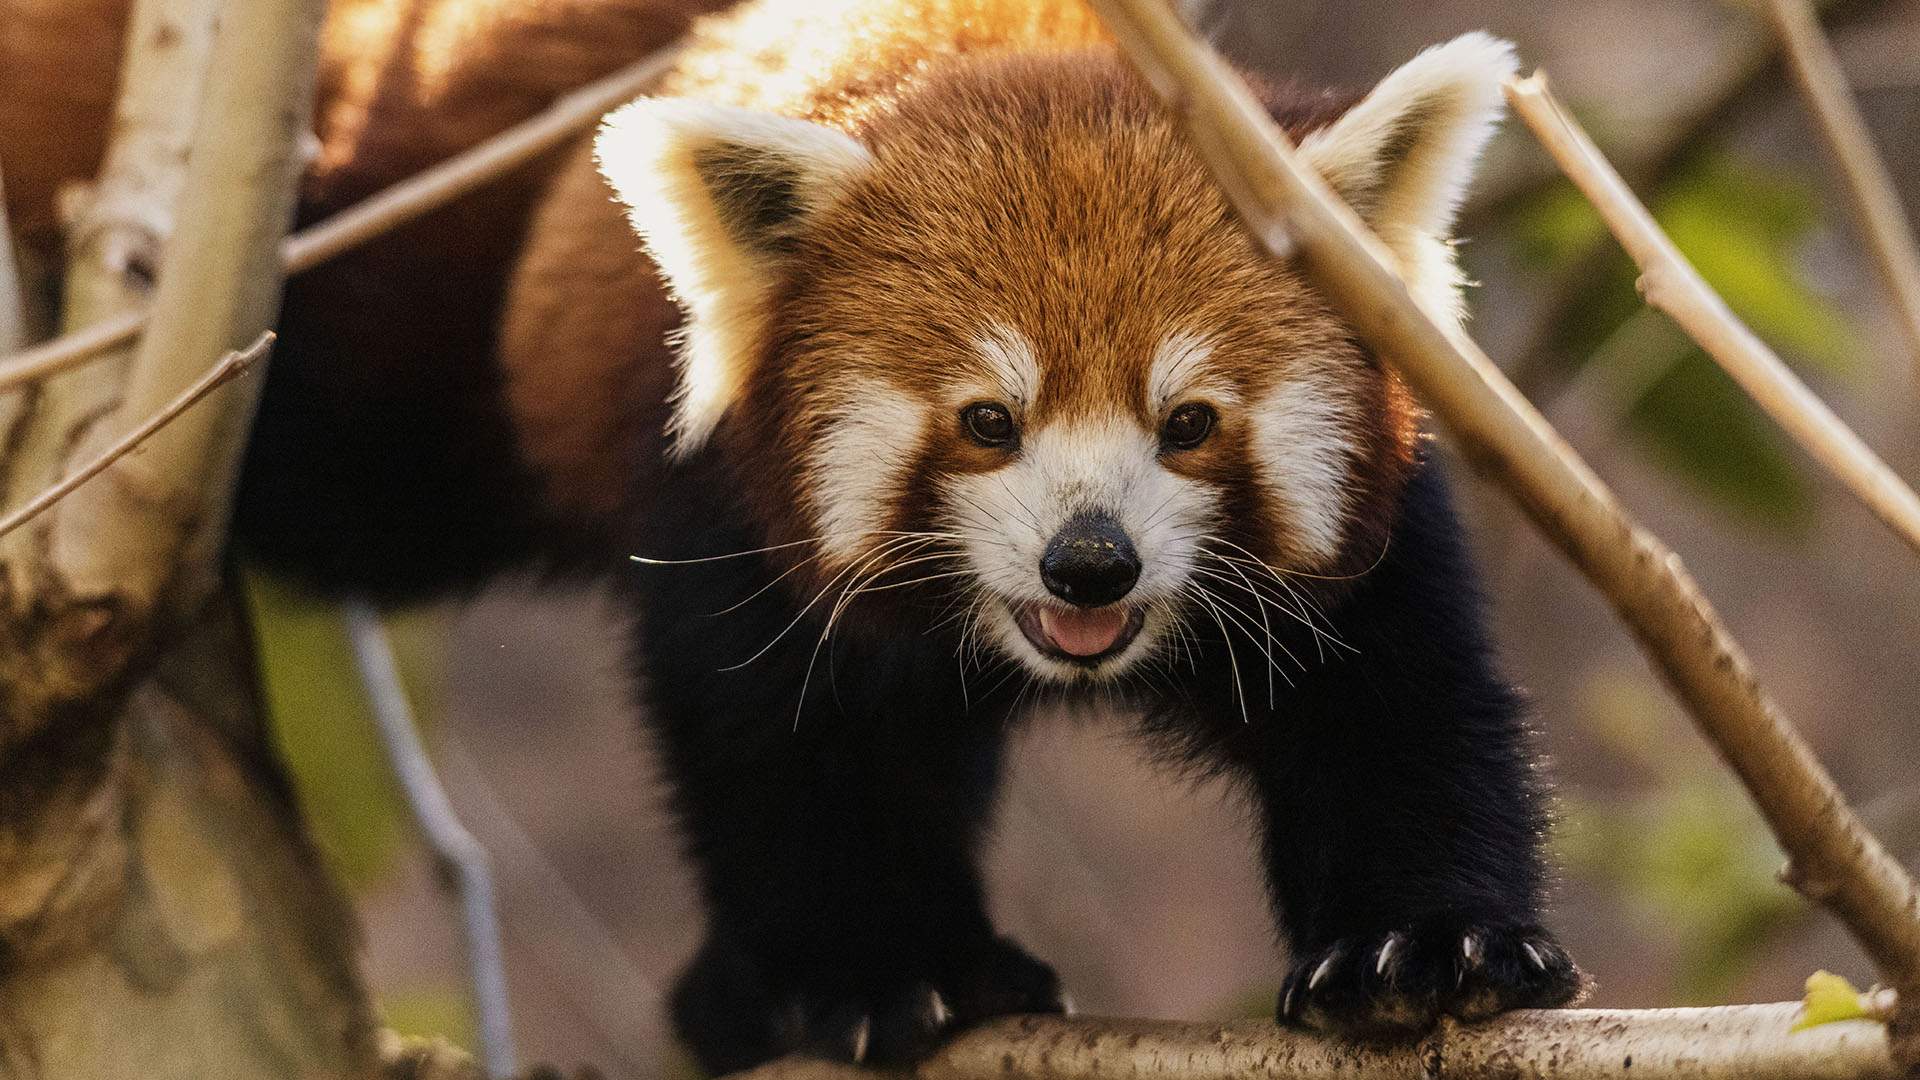 Taronga Zoo Has Just Welcomed Two Adorable Red Panda Cubs and You Can Watch Them From Home